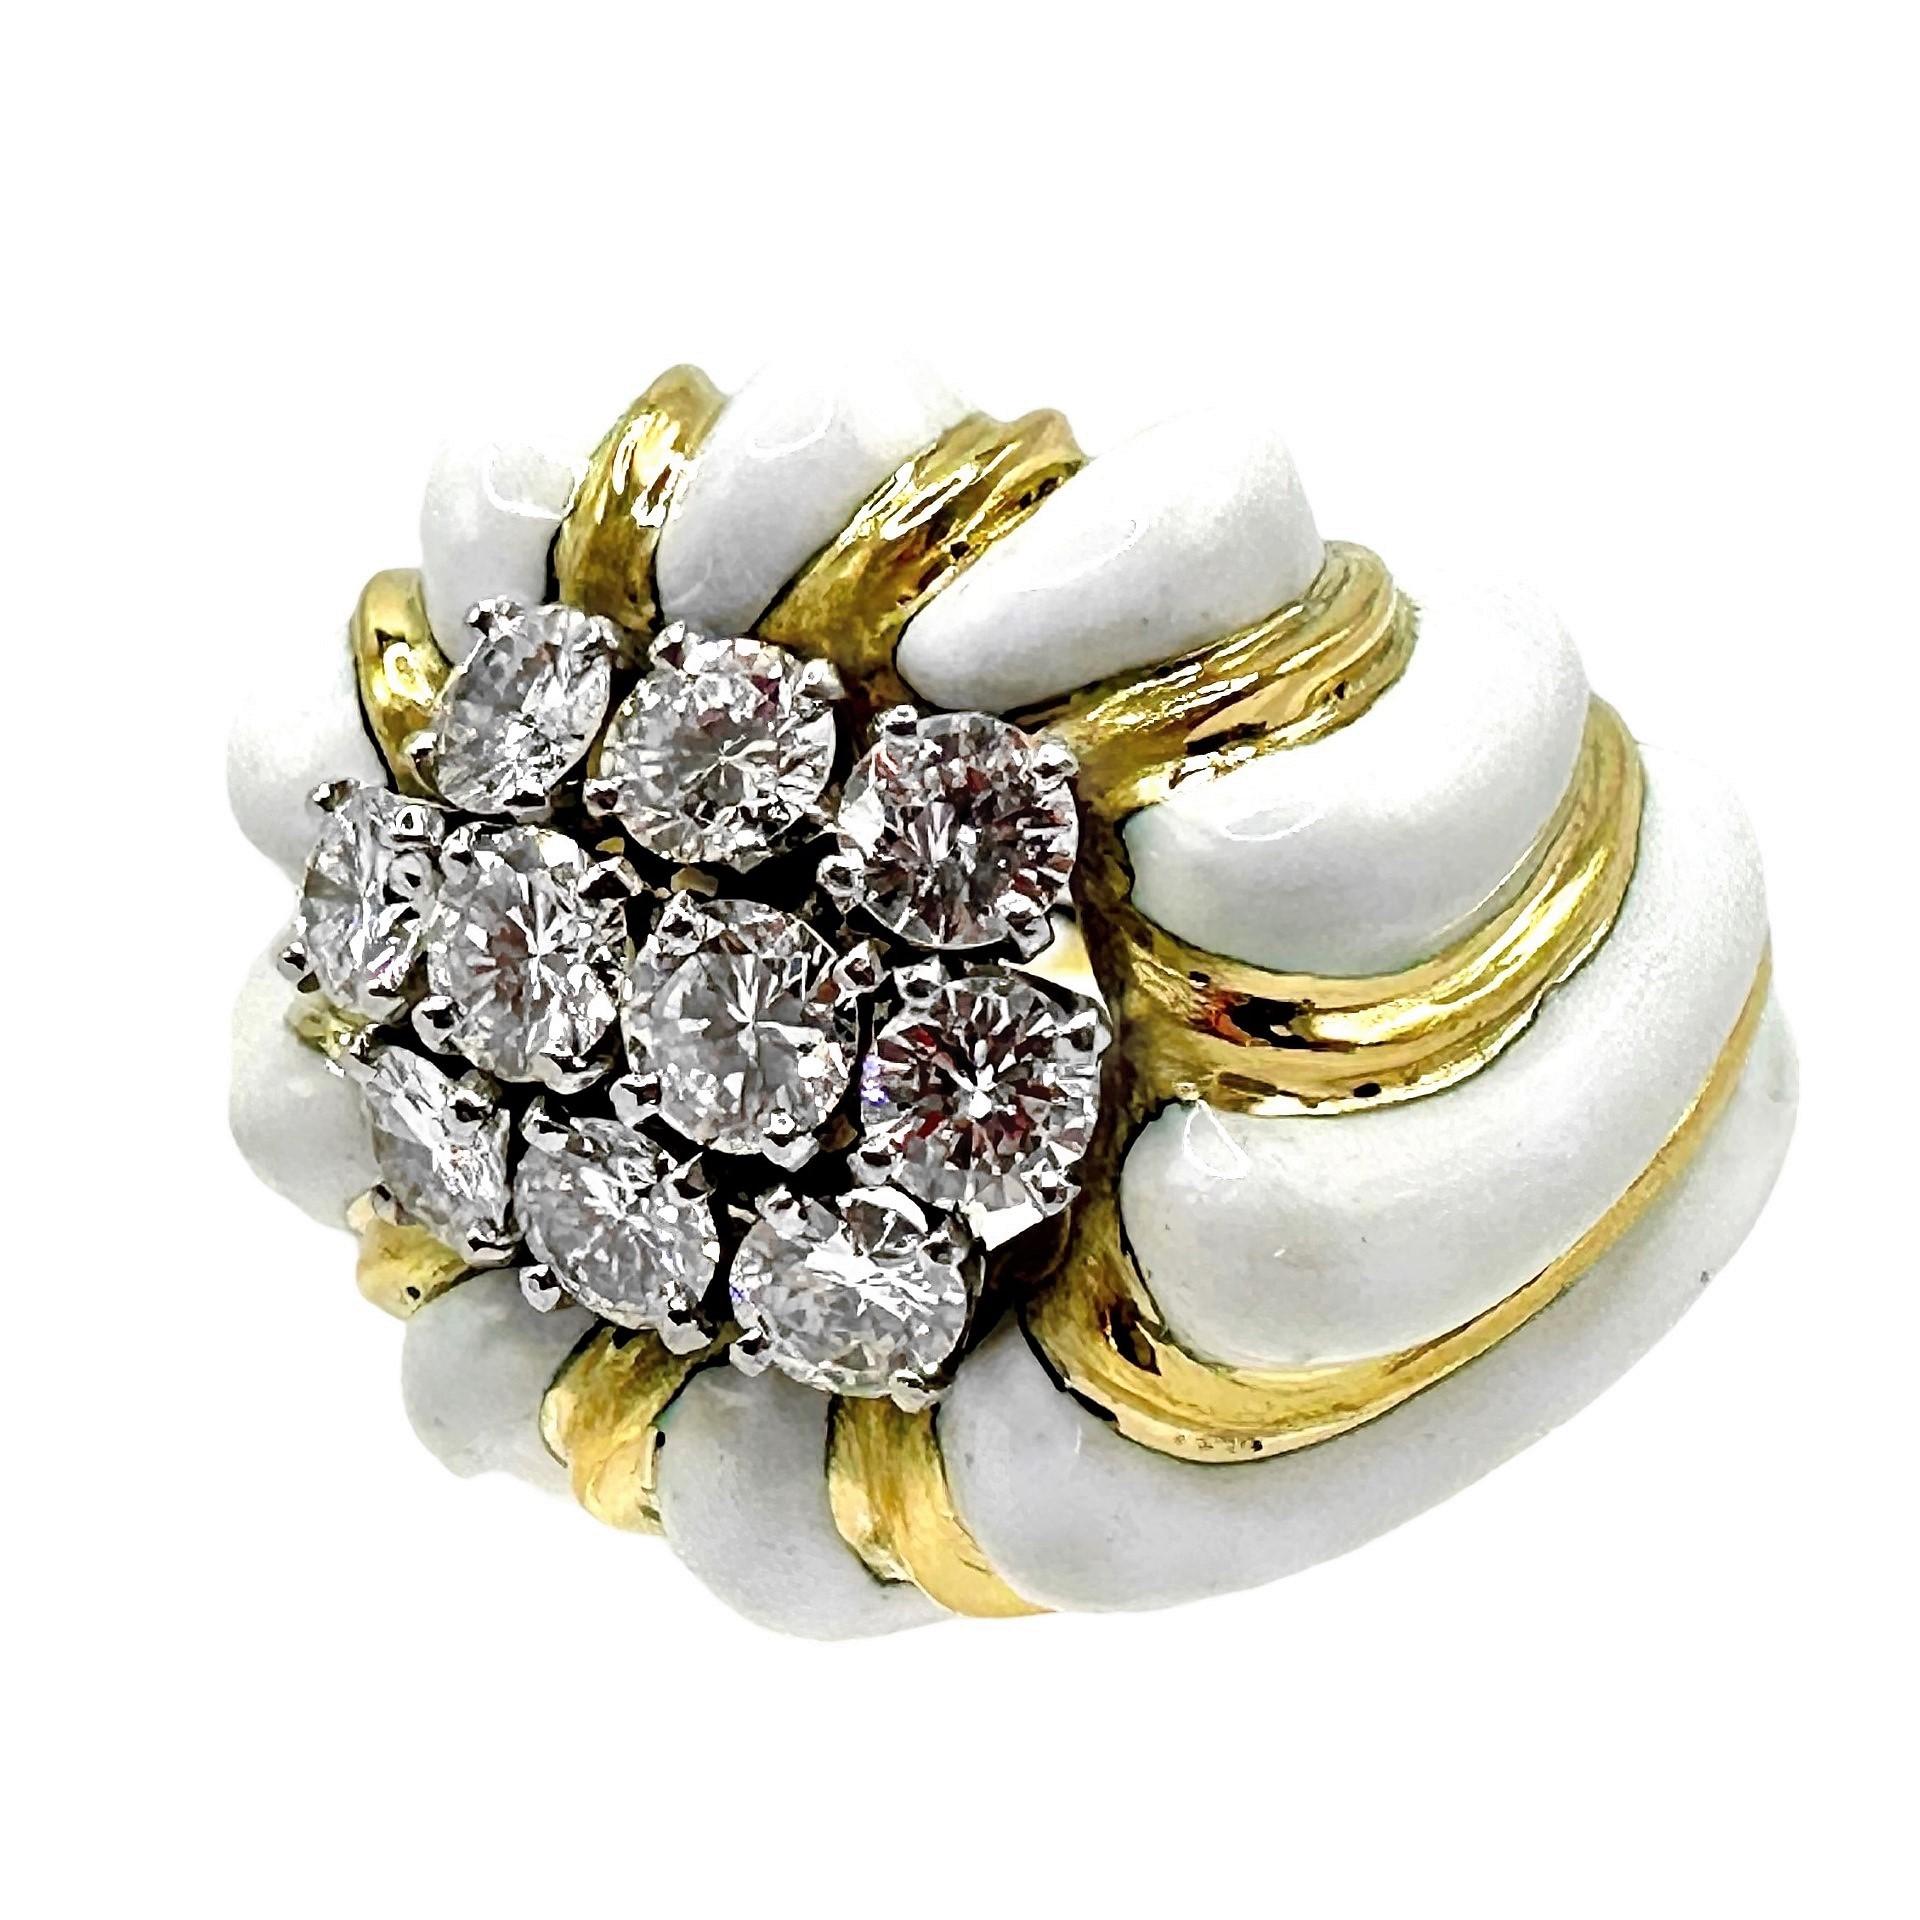 This large and luxurious David Webb creation is characteristic of the designer's work. It measures over 1 full inch across the finger, is 7/8 inches in the other direction, and rises 5/8 inches above the finger when worn. At the center is a cluster